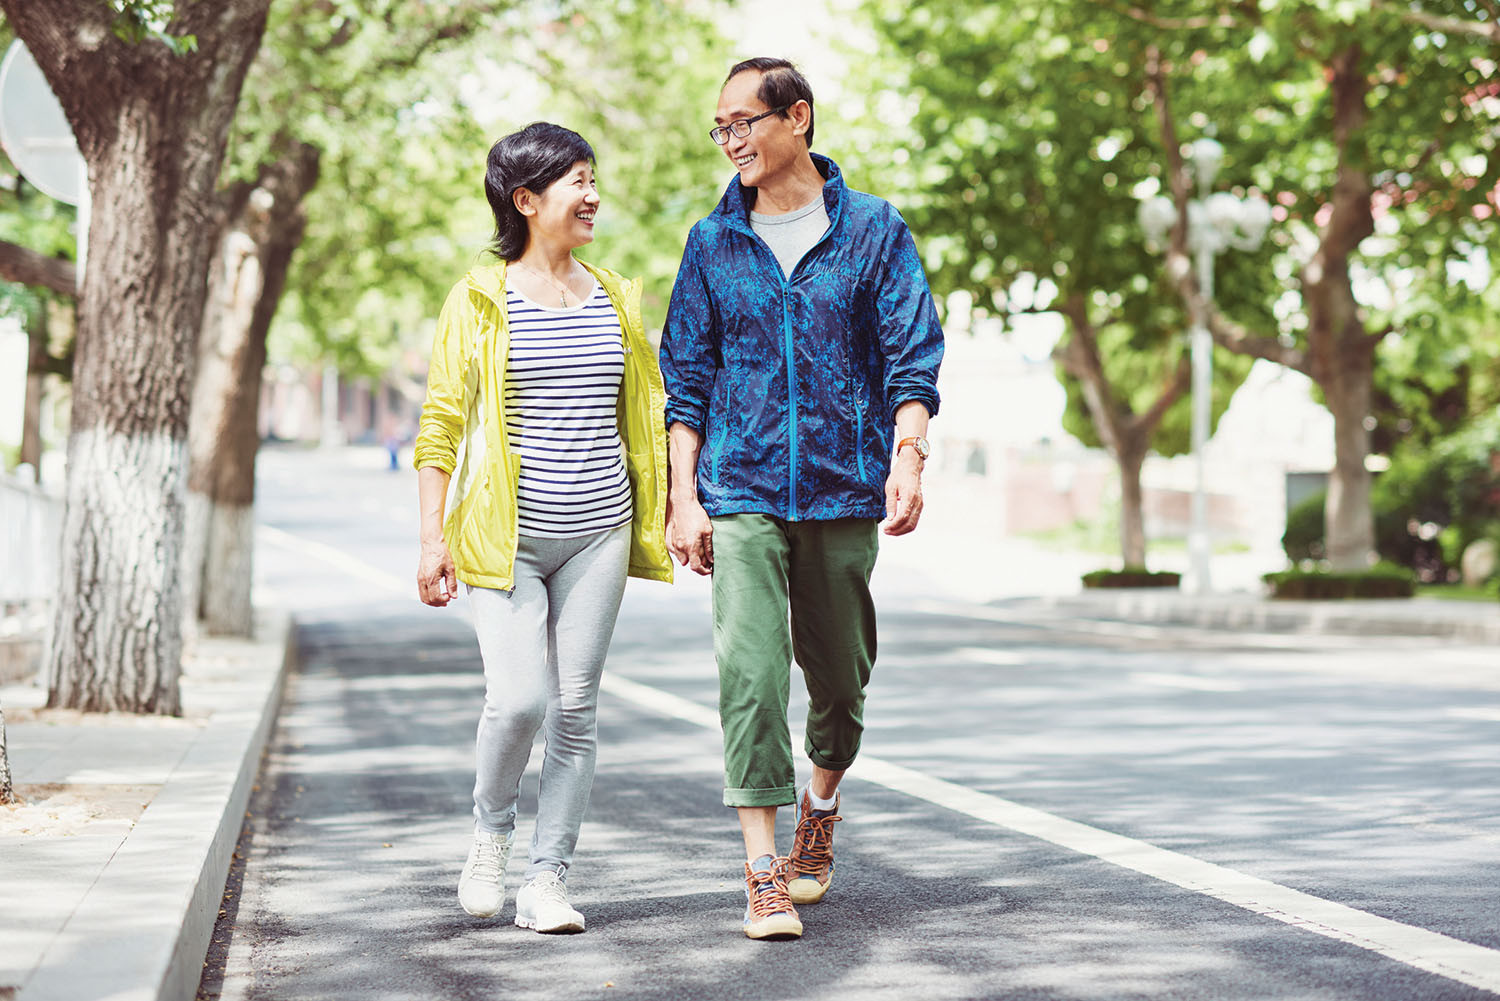 photo of a man and a woman walking outdoors and smiling at each other